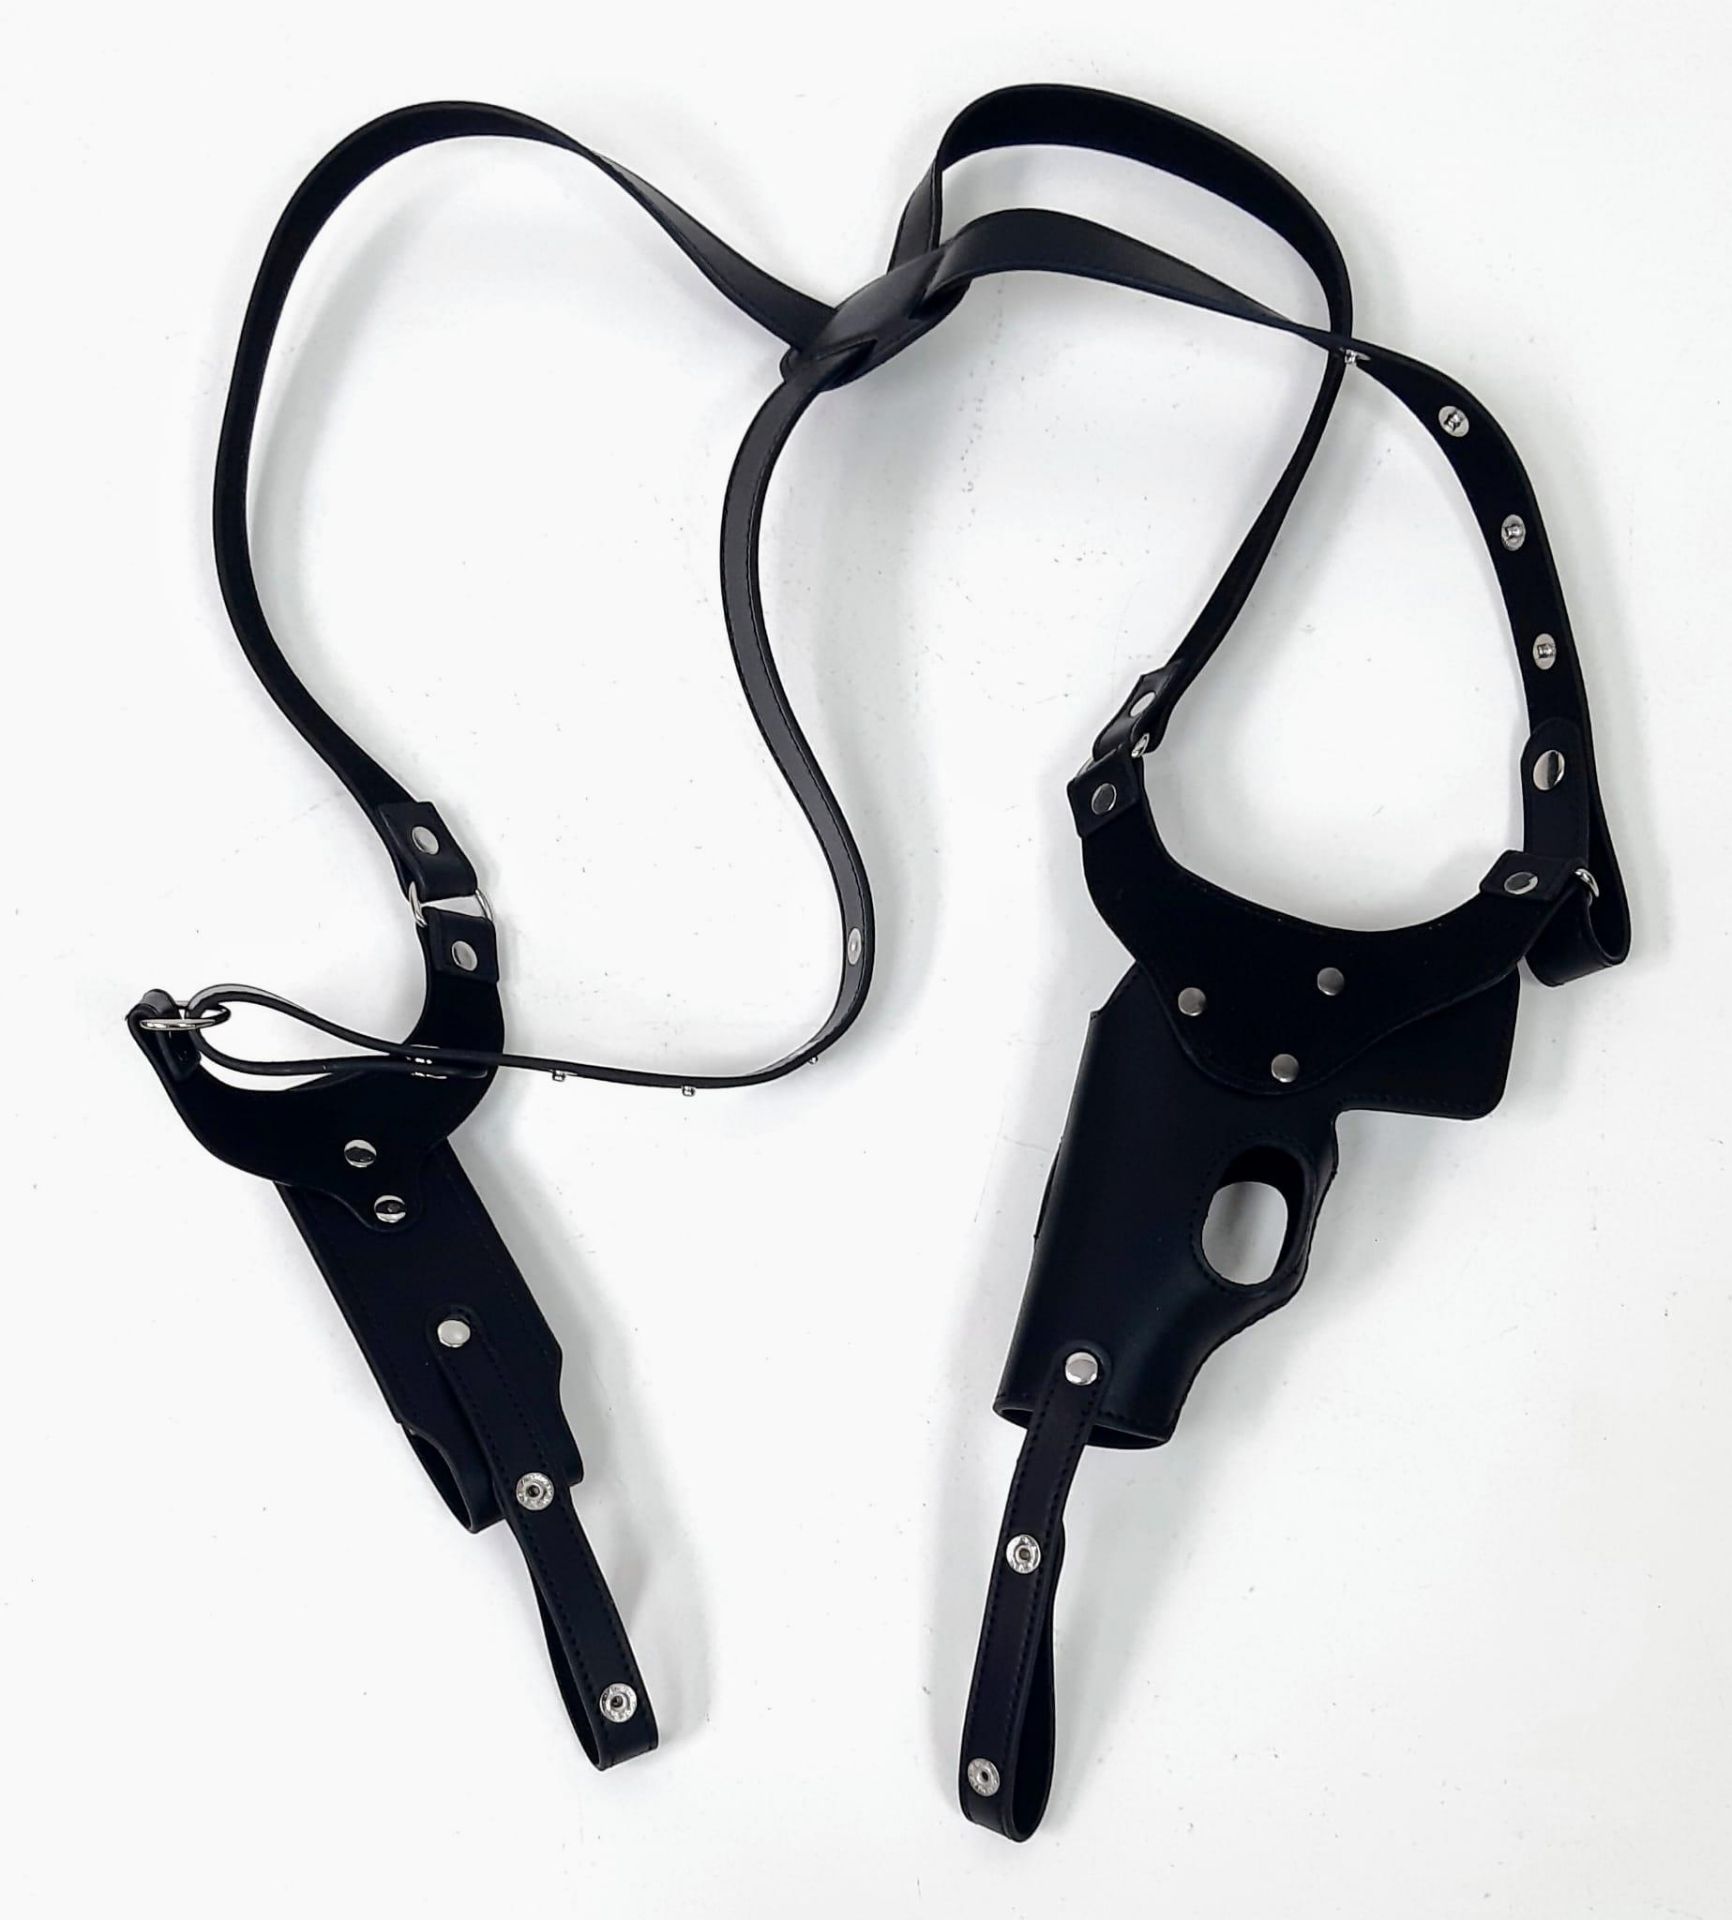 A C.I.A. STYLE BLACK LEATHER SHOULDER HOLSTER , FULLY ADJUSTABLE AND WITH REMOVABLE BELT LOOP - Image 2 of 2